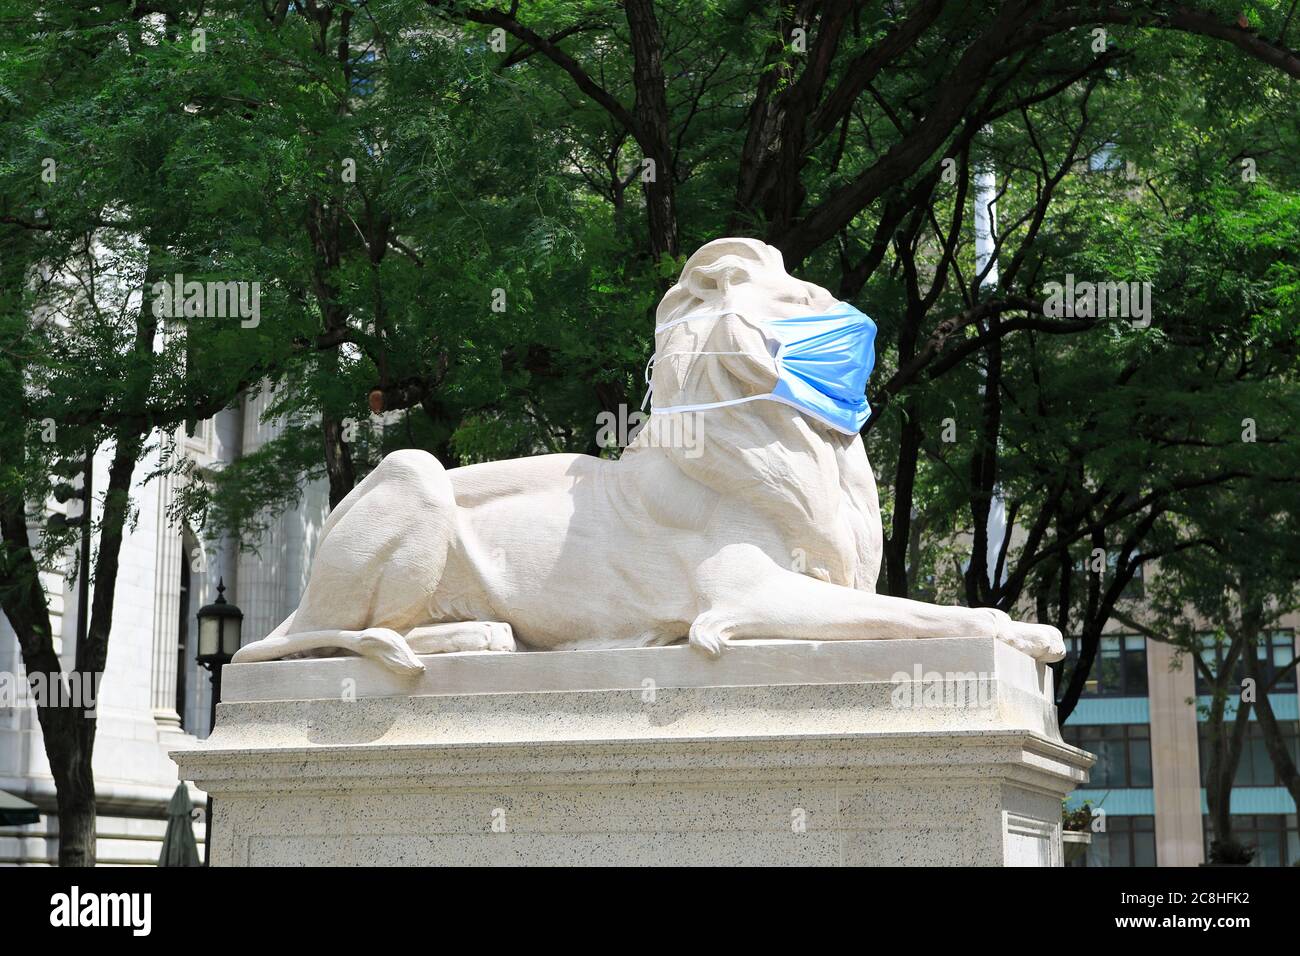 Patience, and Fortitude the marble lion statues that guard the New York Public Library's main branch, the Stephen A. Schwarzman building on 5th Avenue and 42nd Street, wear blue face masks to set an example for New Yorkers during the coronavirus, Covid-19 pandemic, Midtown Manhattan, New York City, USA July 2020 Stock Photo